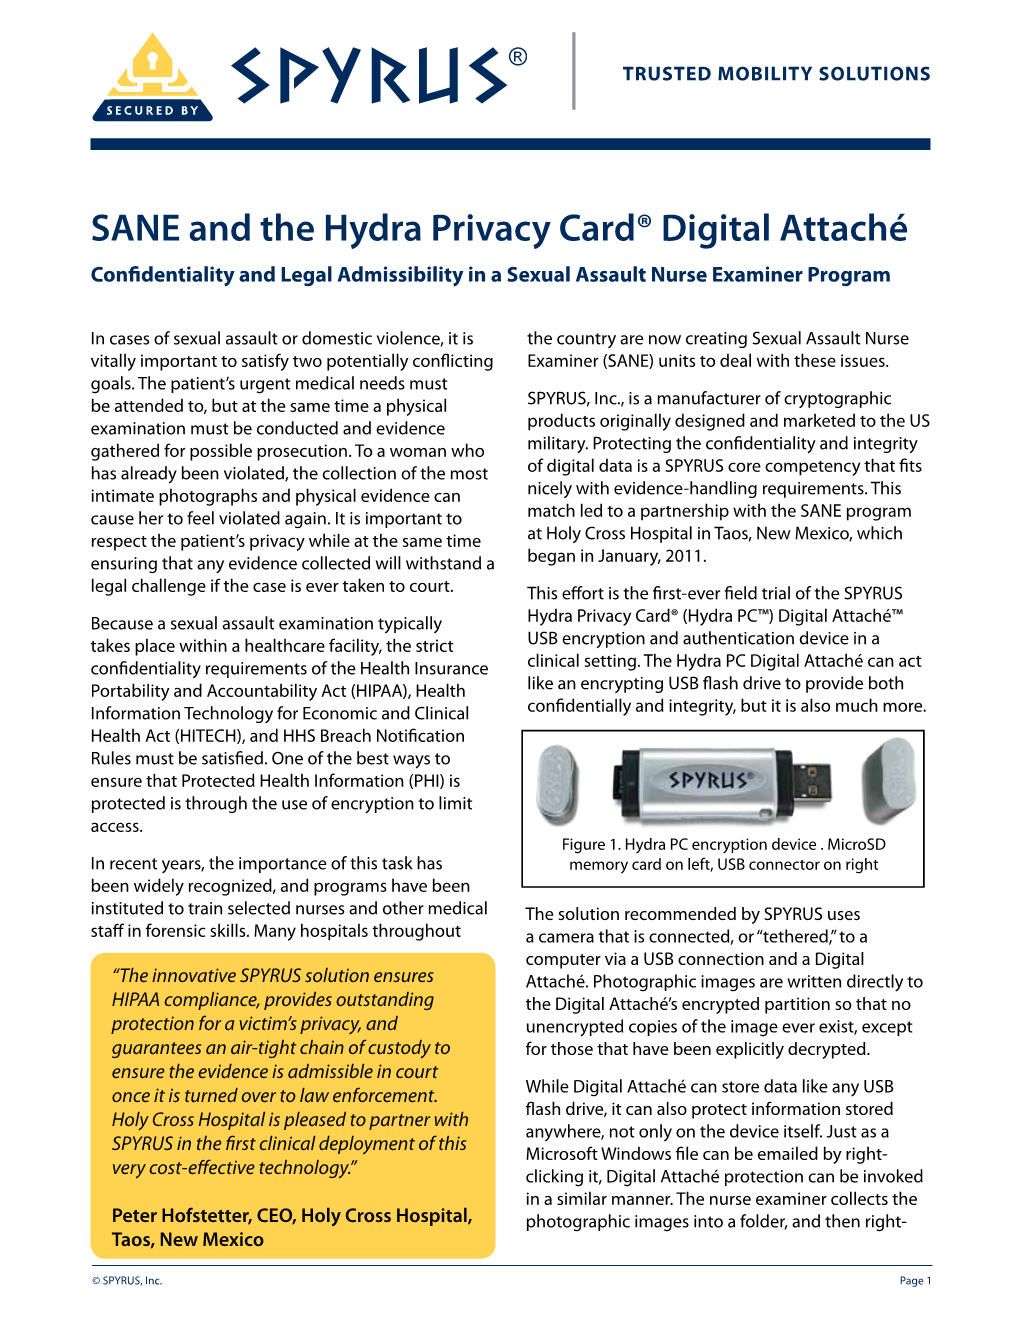 SANE and the Hydra Privacy Card® Digital Attaché Confidentiality and Legal Admissibility in a Sexual Assault Nurse Examiner Program